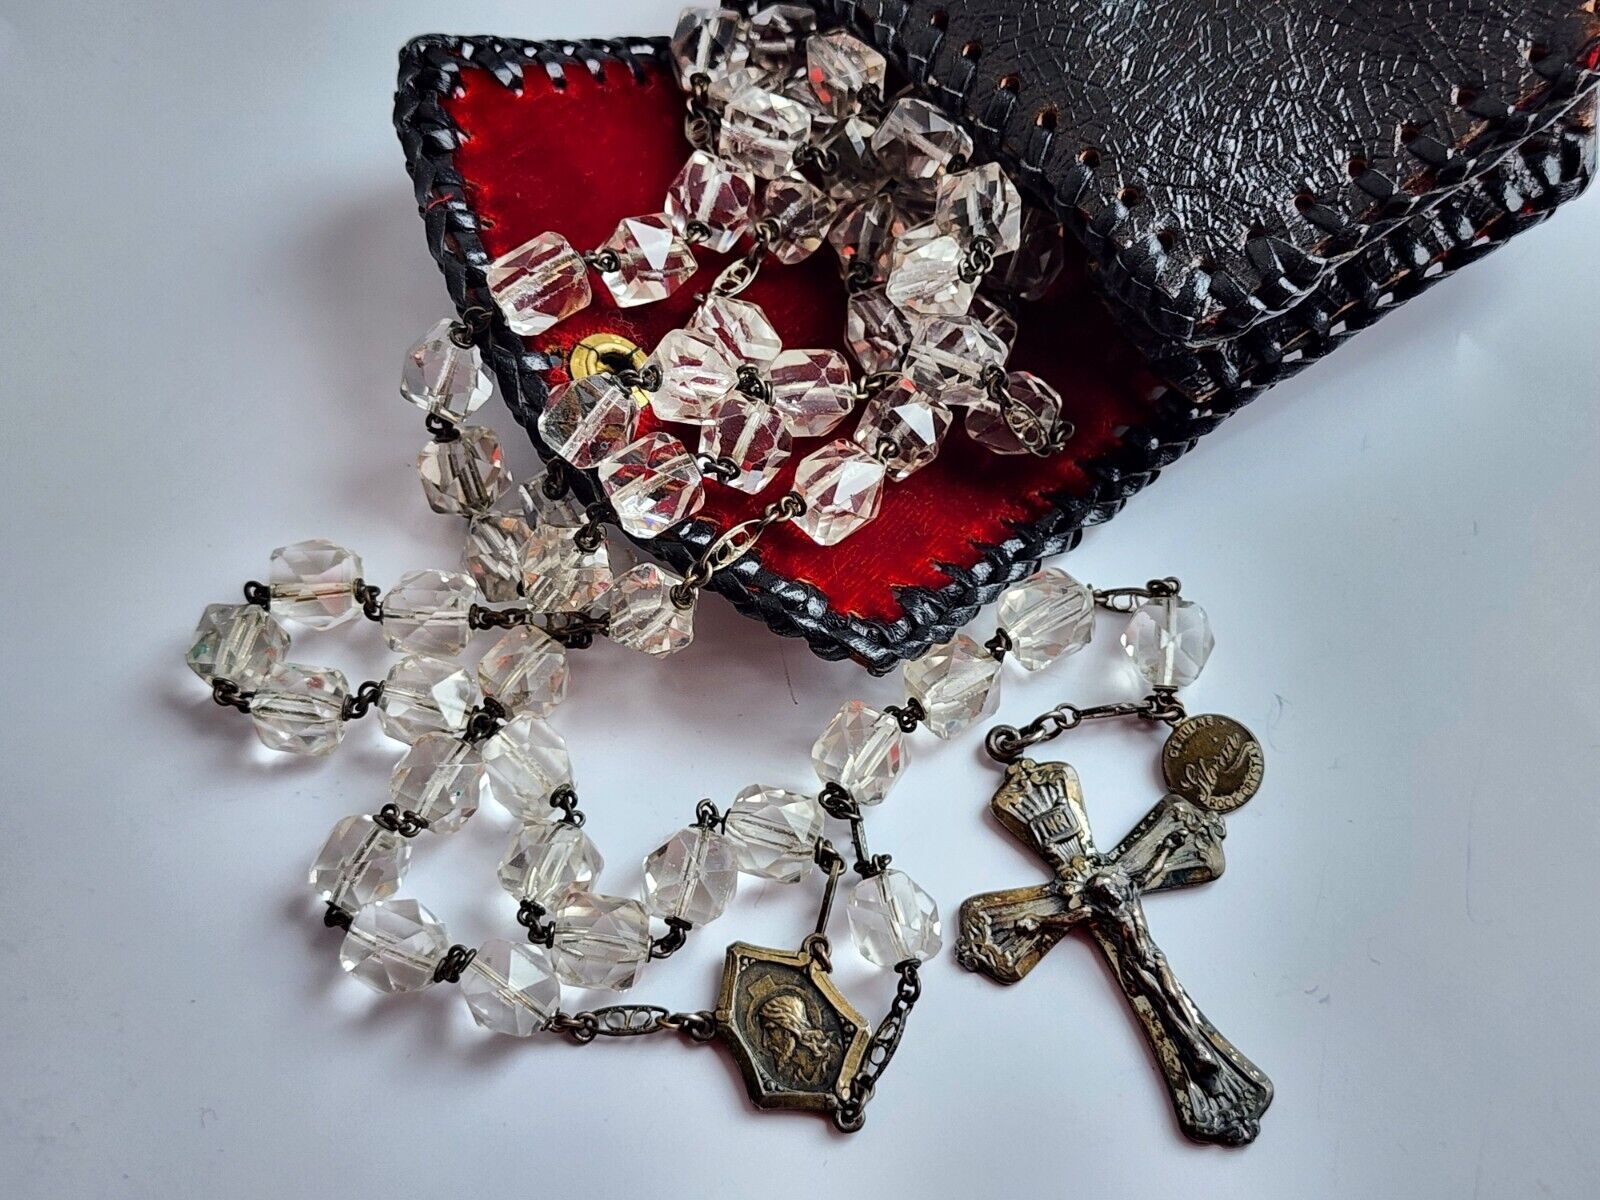 ☆STUNNING BIG & HEAVY☆ ROSARY STERLING SILVER & ROCK CRYSTAL GLORIA ANTIQUE